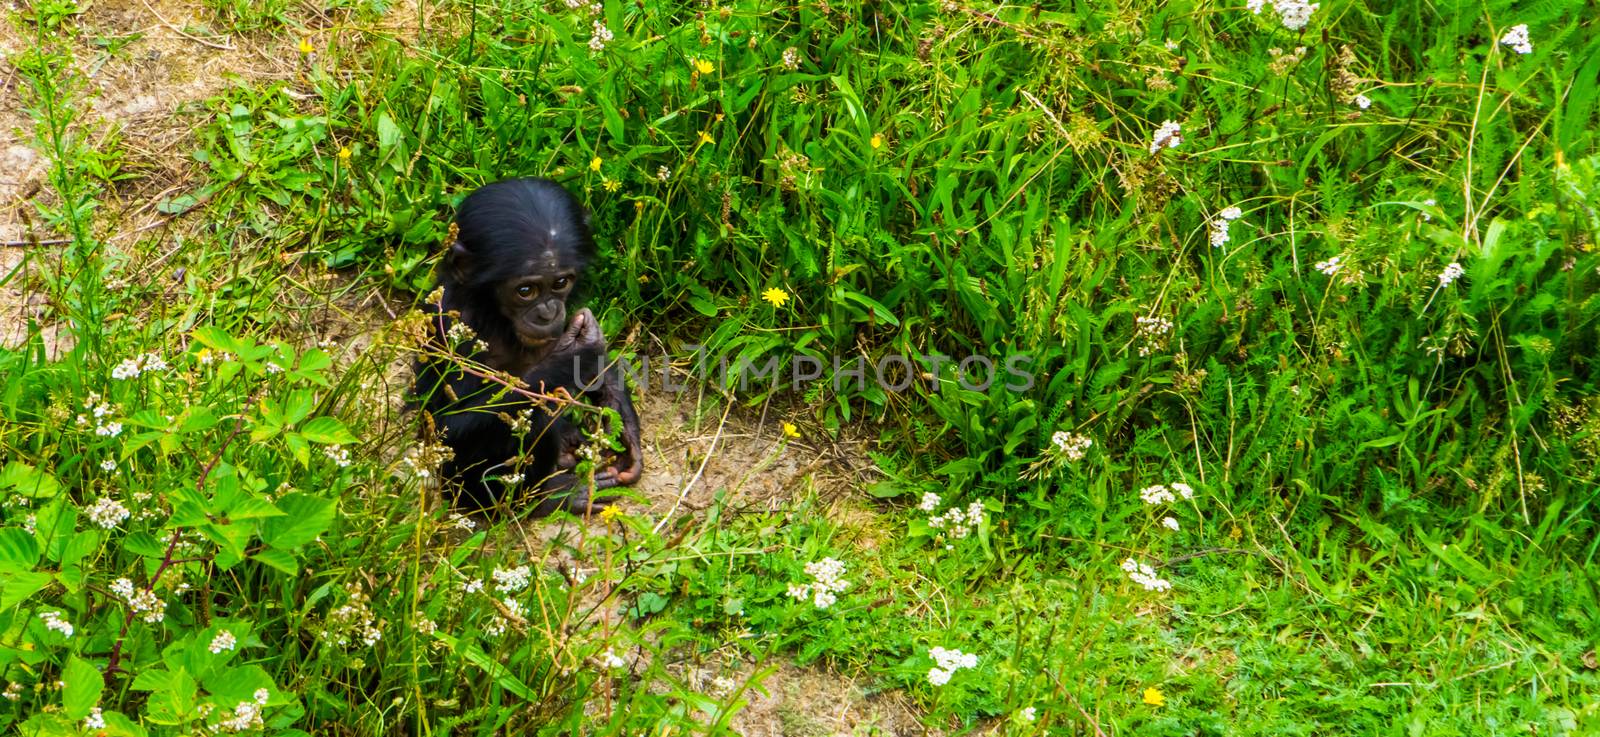 Adorable bonobo infant sitting in the grass, human ape baby, Endangered primate specie from Africa by charlottebleijenberg